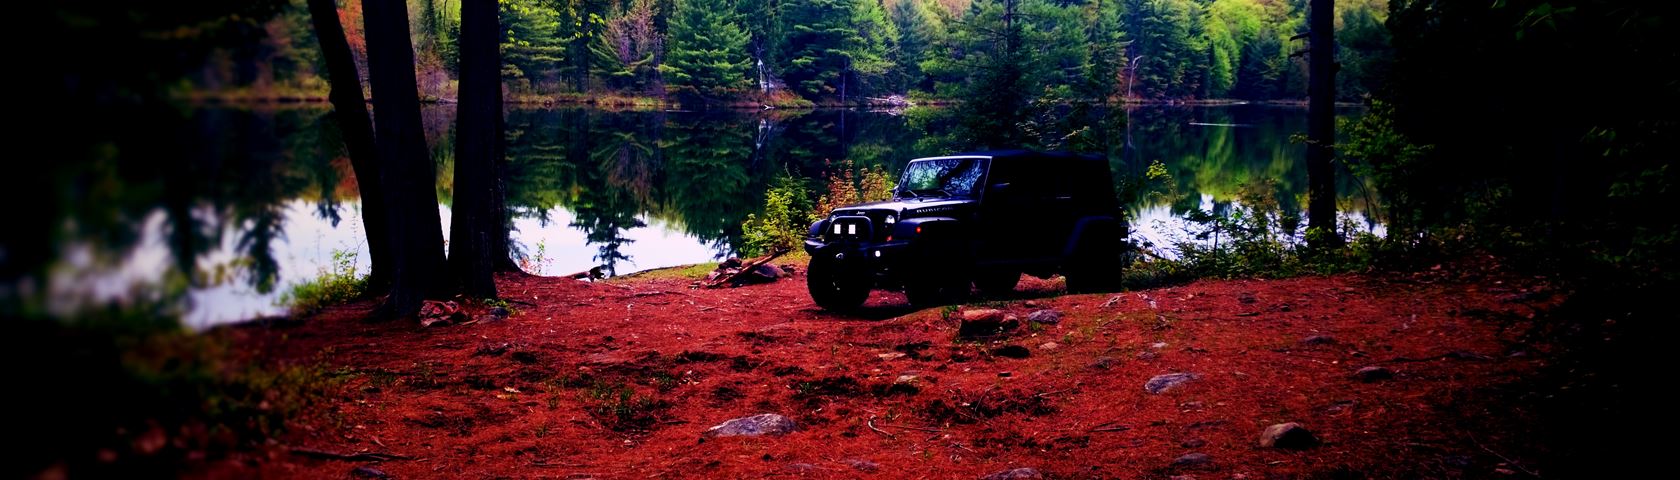 Jeep Rubicon on red lake shore